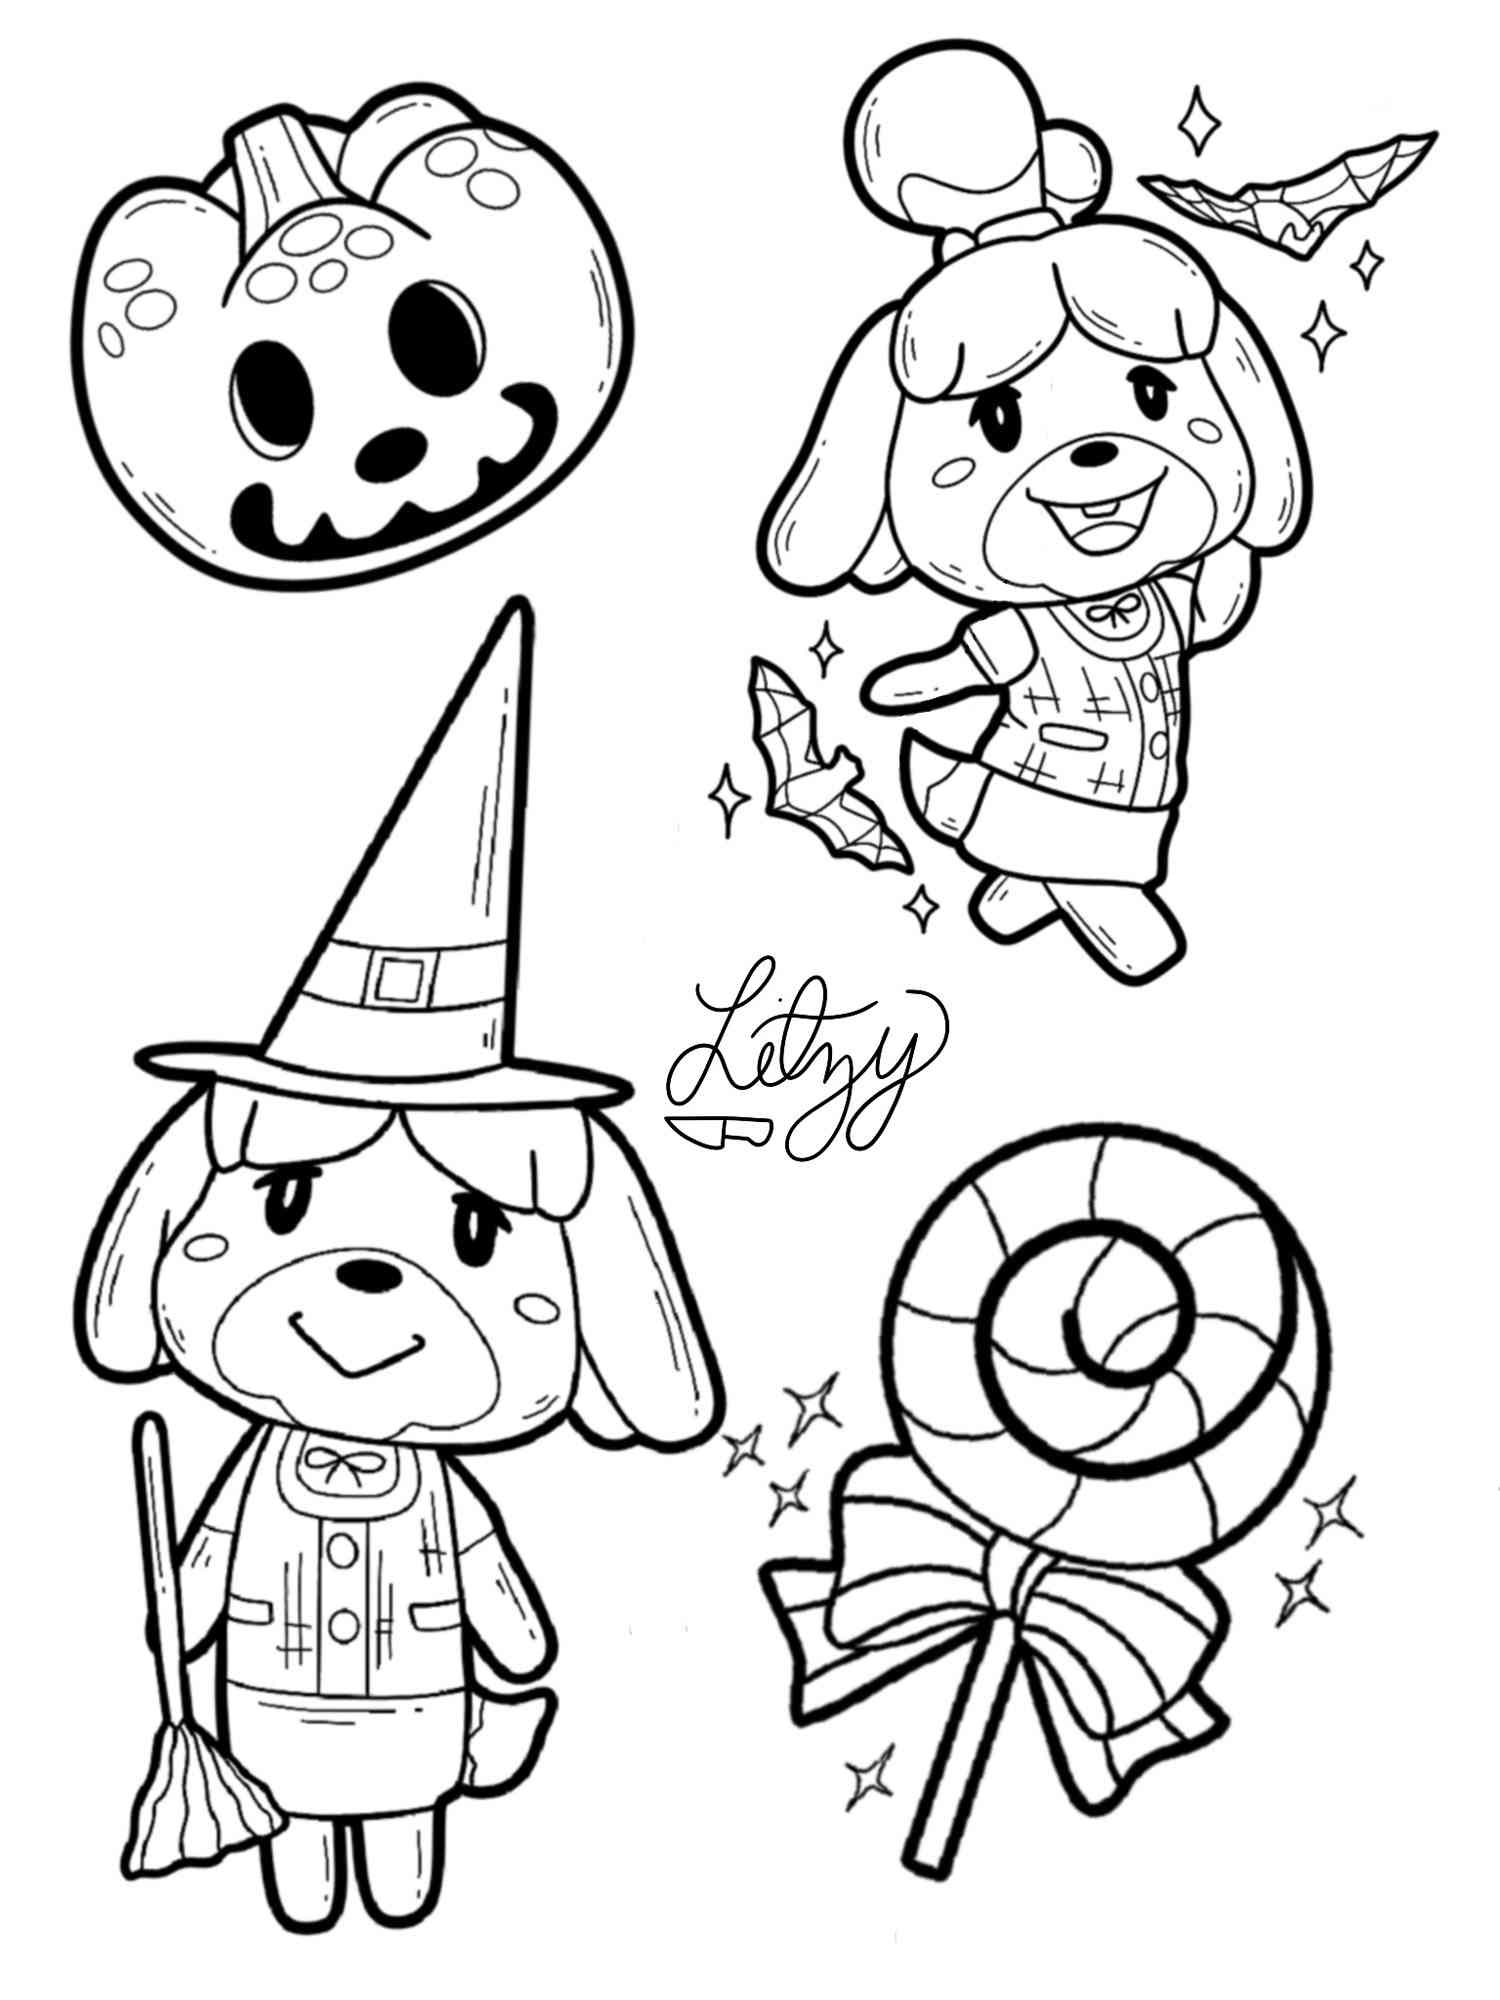 Animal Crossing Halloween coloring page